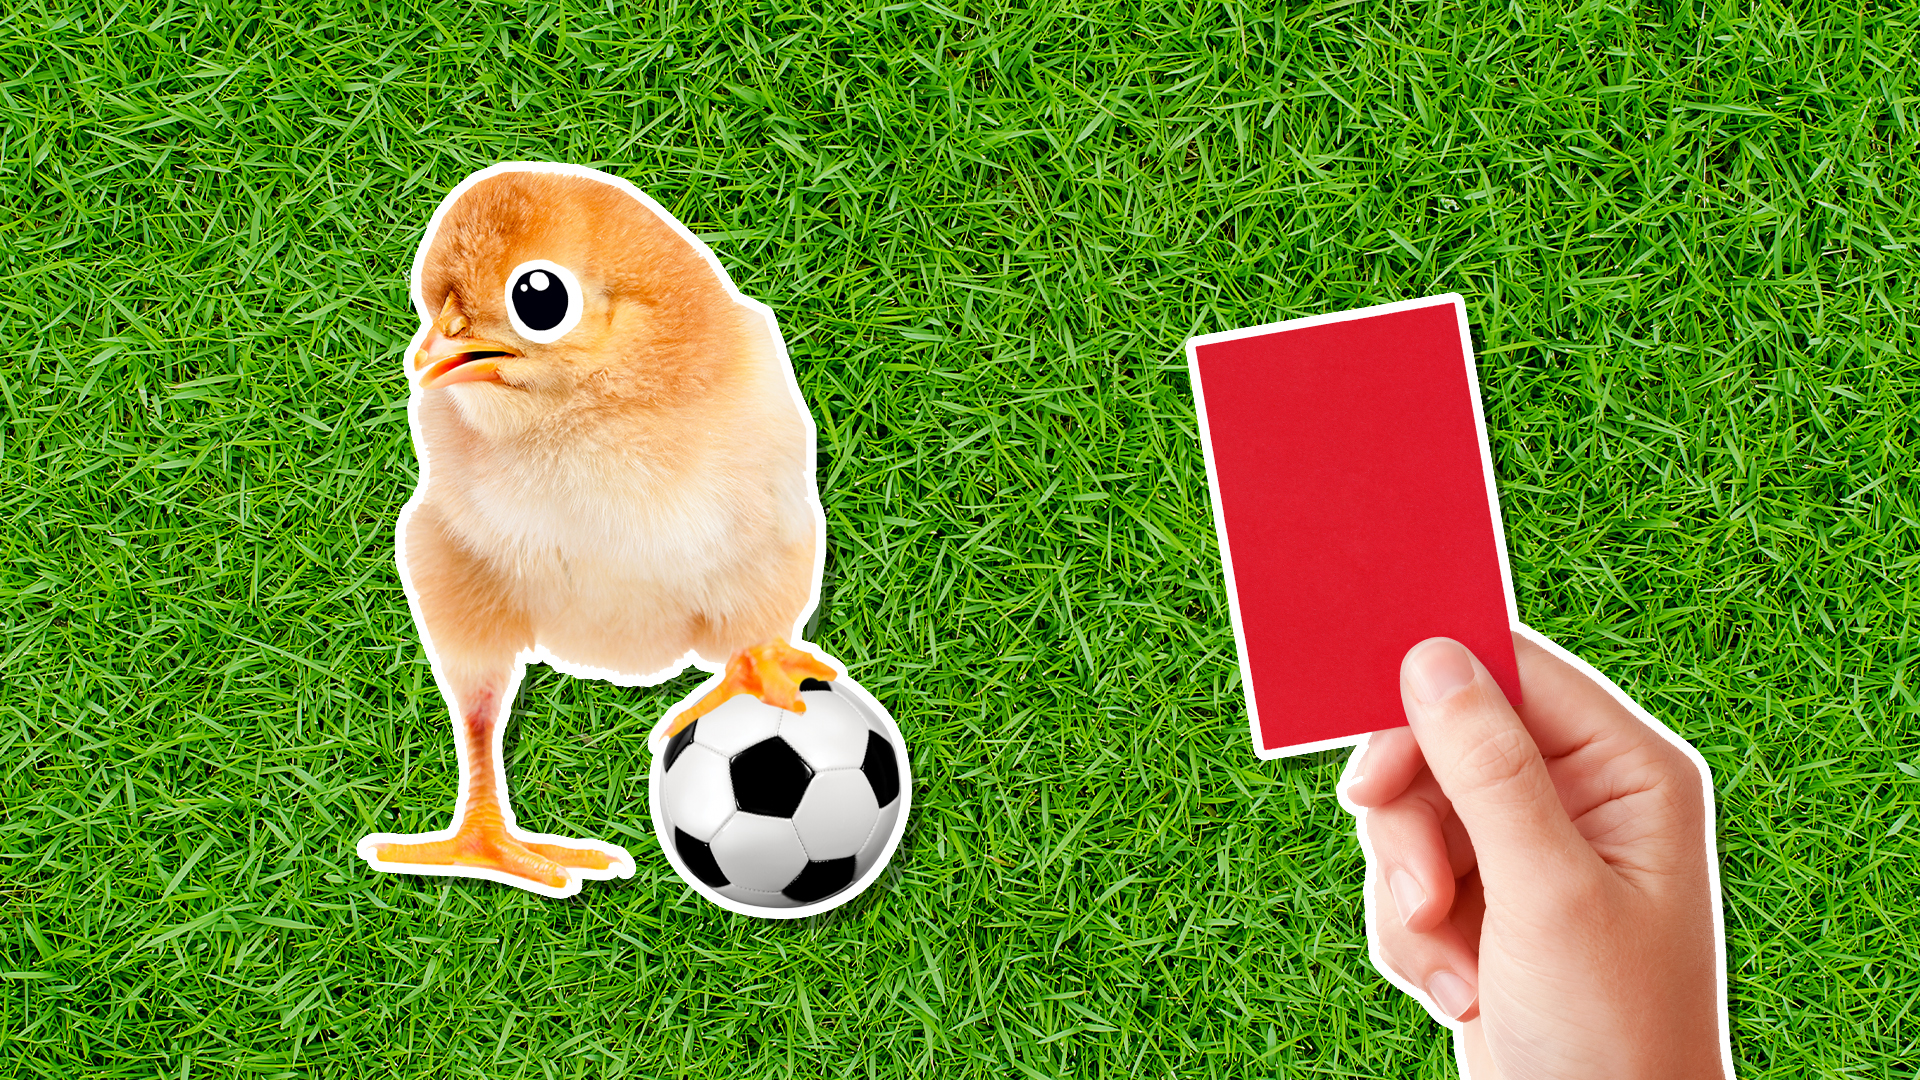 A chicken playing football